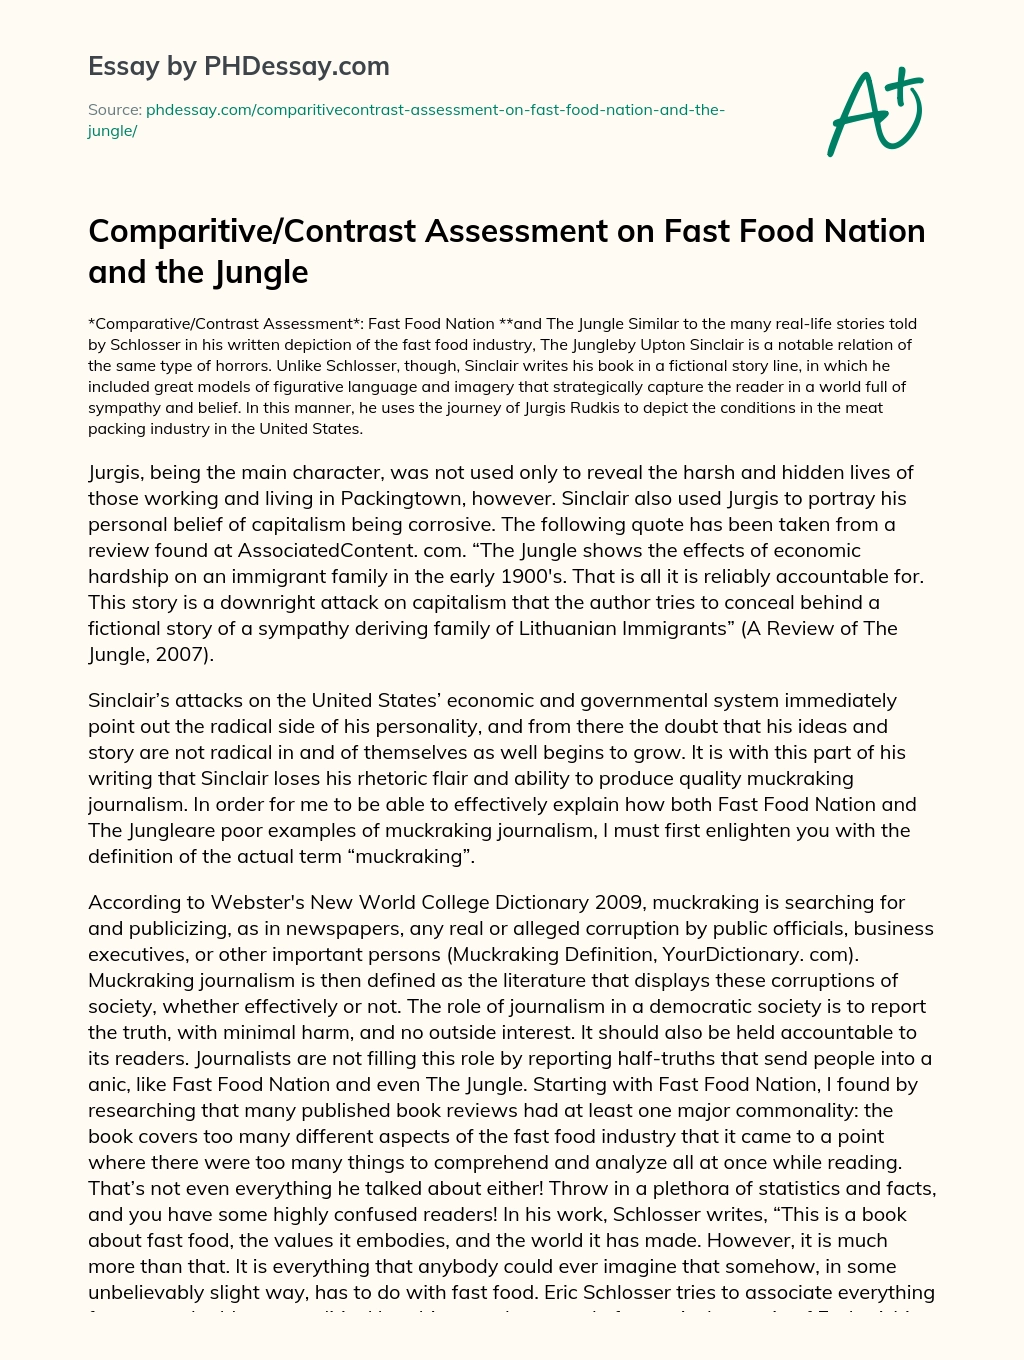 Comparitive/Contrast Assessment on Fast Food Nation and the Jungle essay